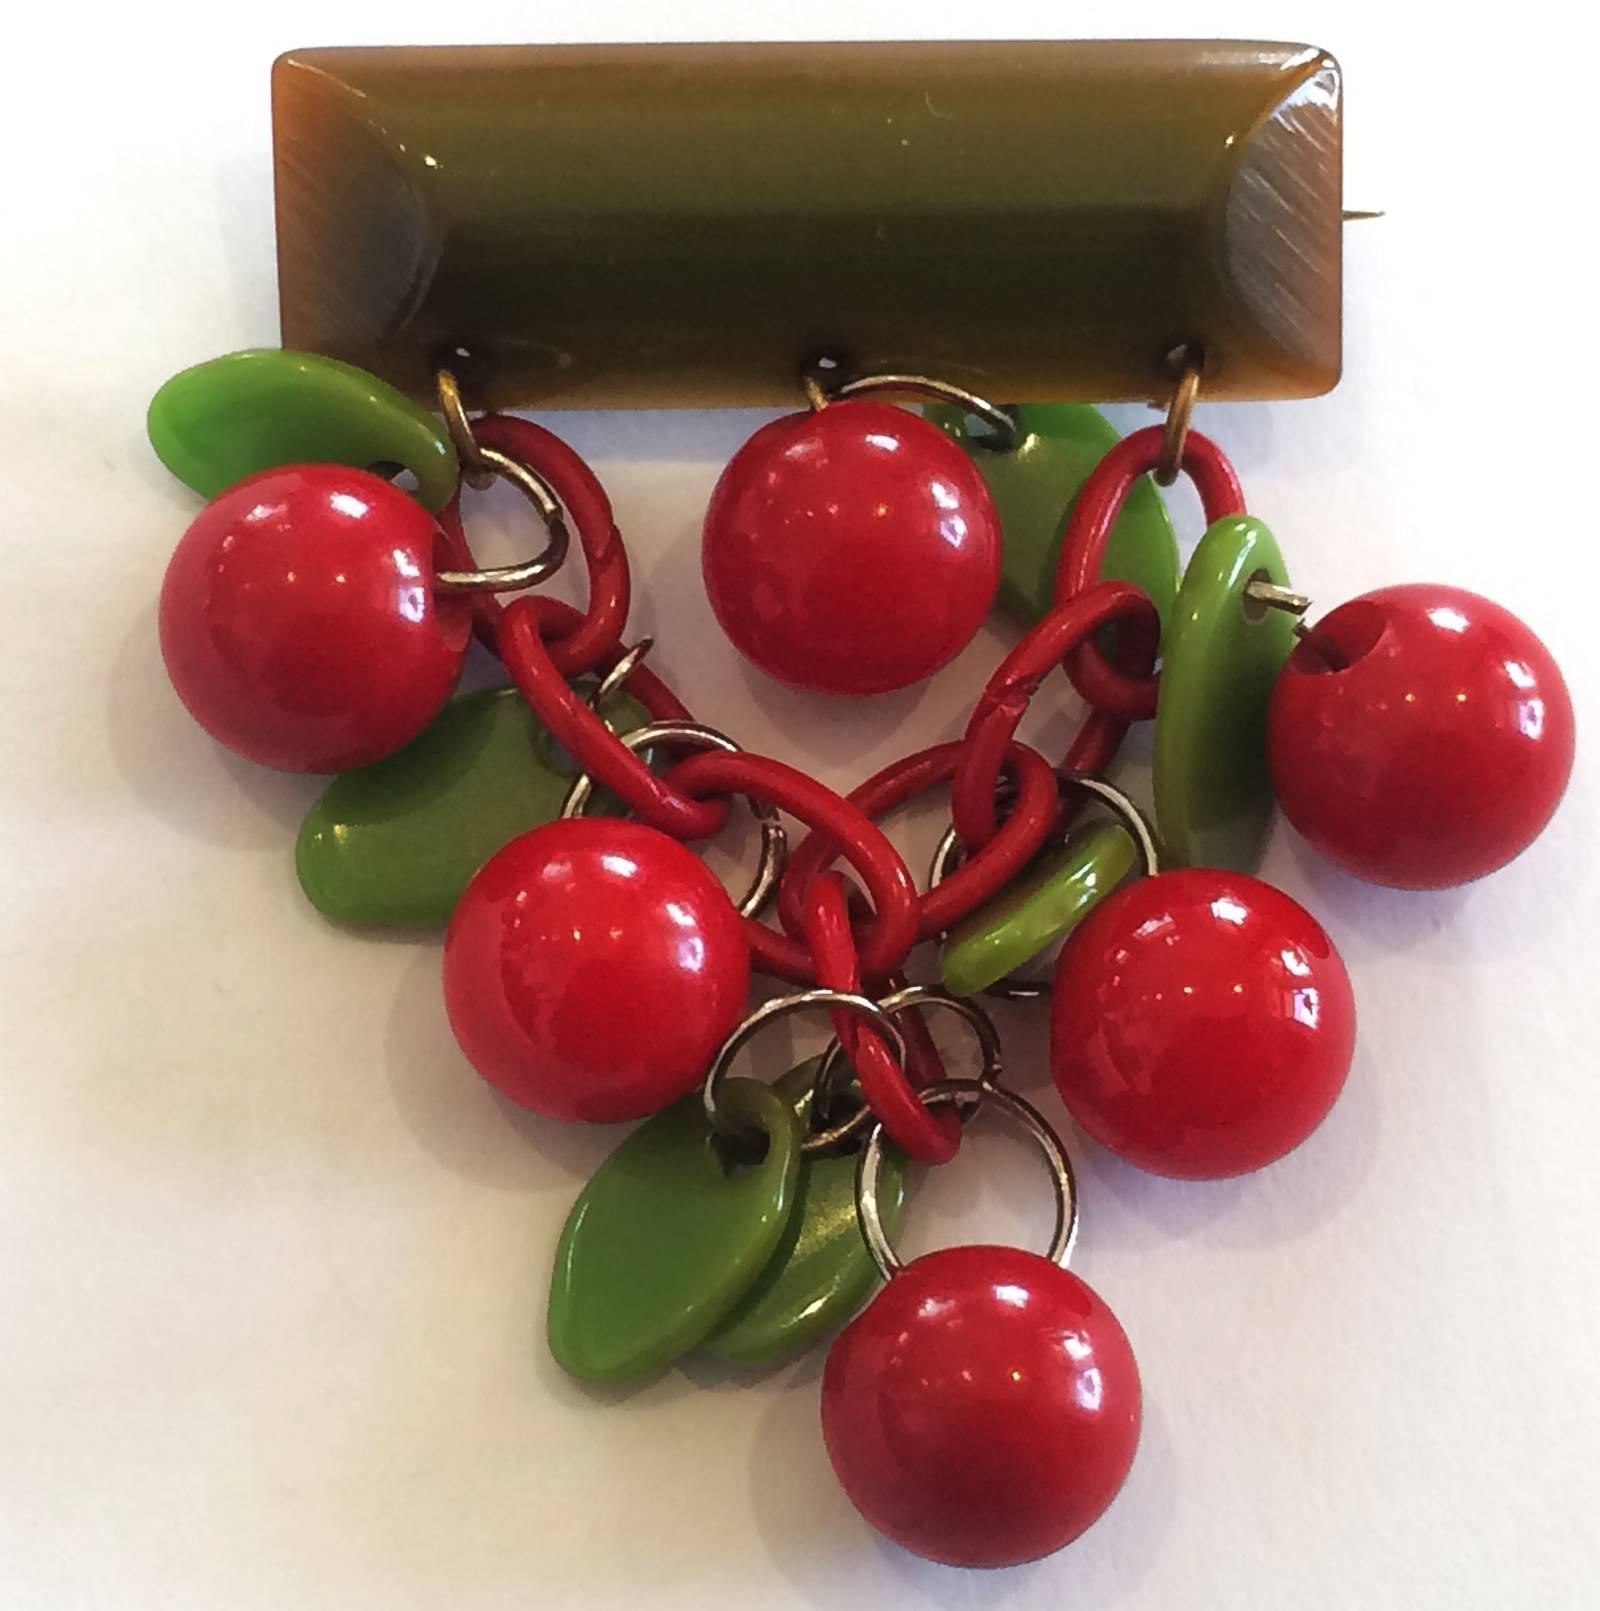 Art Deco American Bar Pin / Brooch in Bakelite, with bright Red Cherries and Green Leaves, with original “roll-over” safety pin clasp to rear. All perfect with no damage, repairs or losses. Dimensions approx..: 4.5cm wide bar  x 6.6cm drop, Cherries